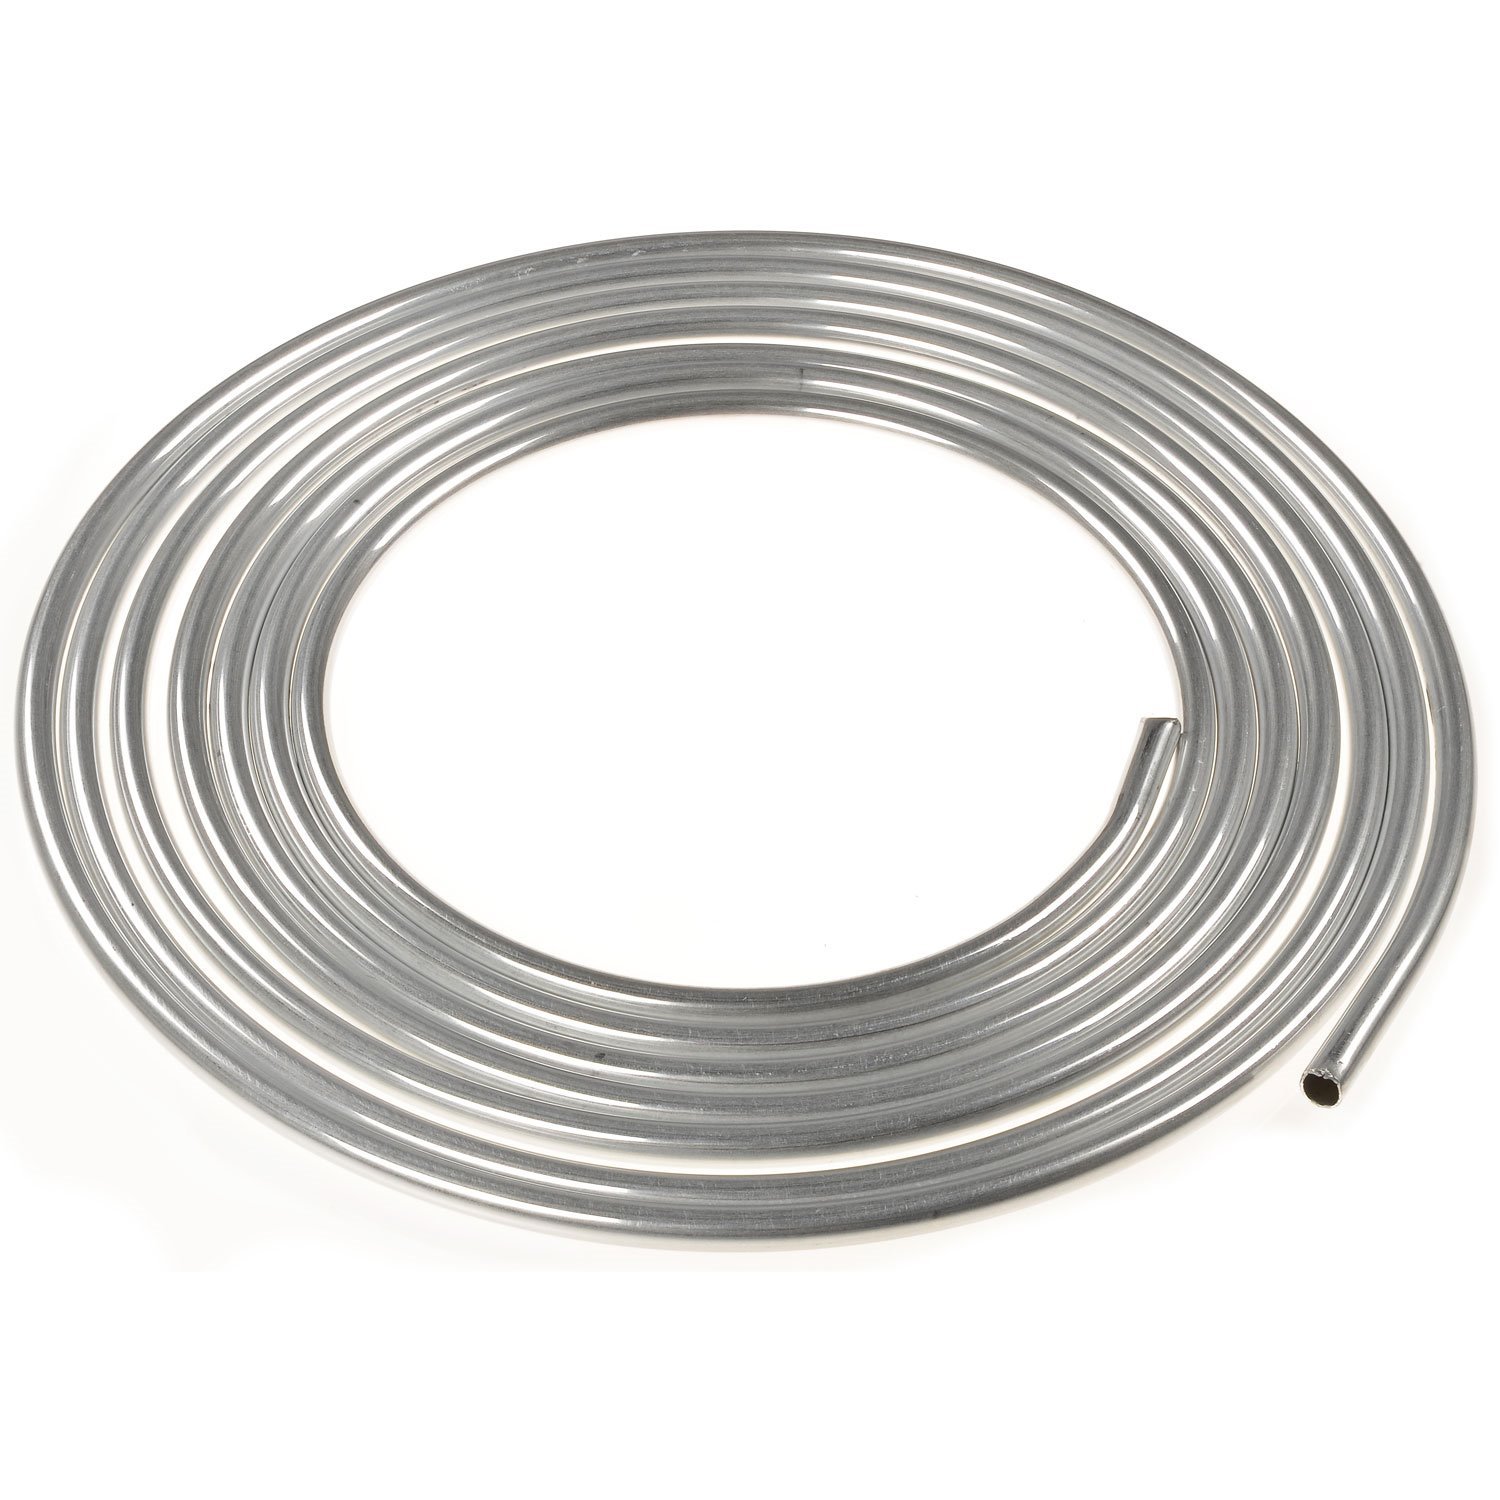 Aluminum Fuel Line [1/2 in. OD x 0.035 in. Wall]